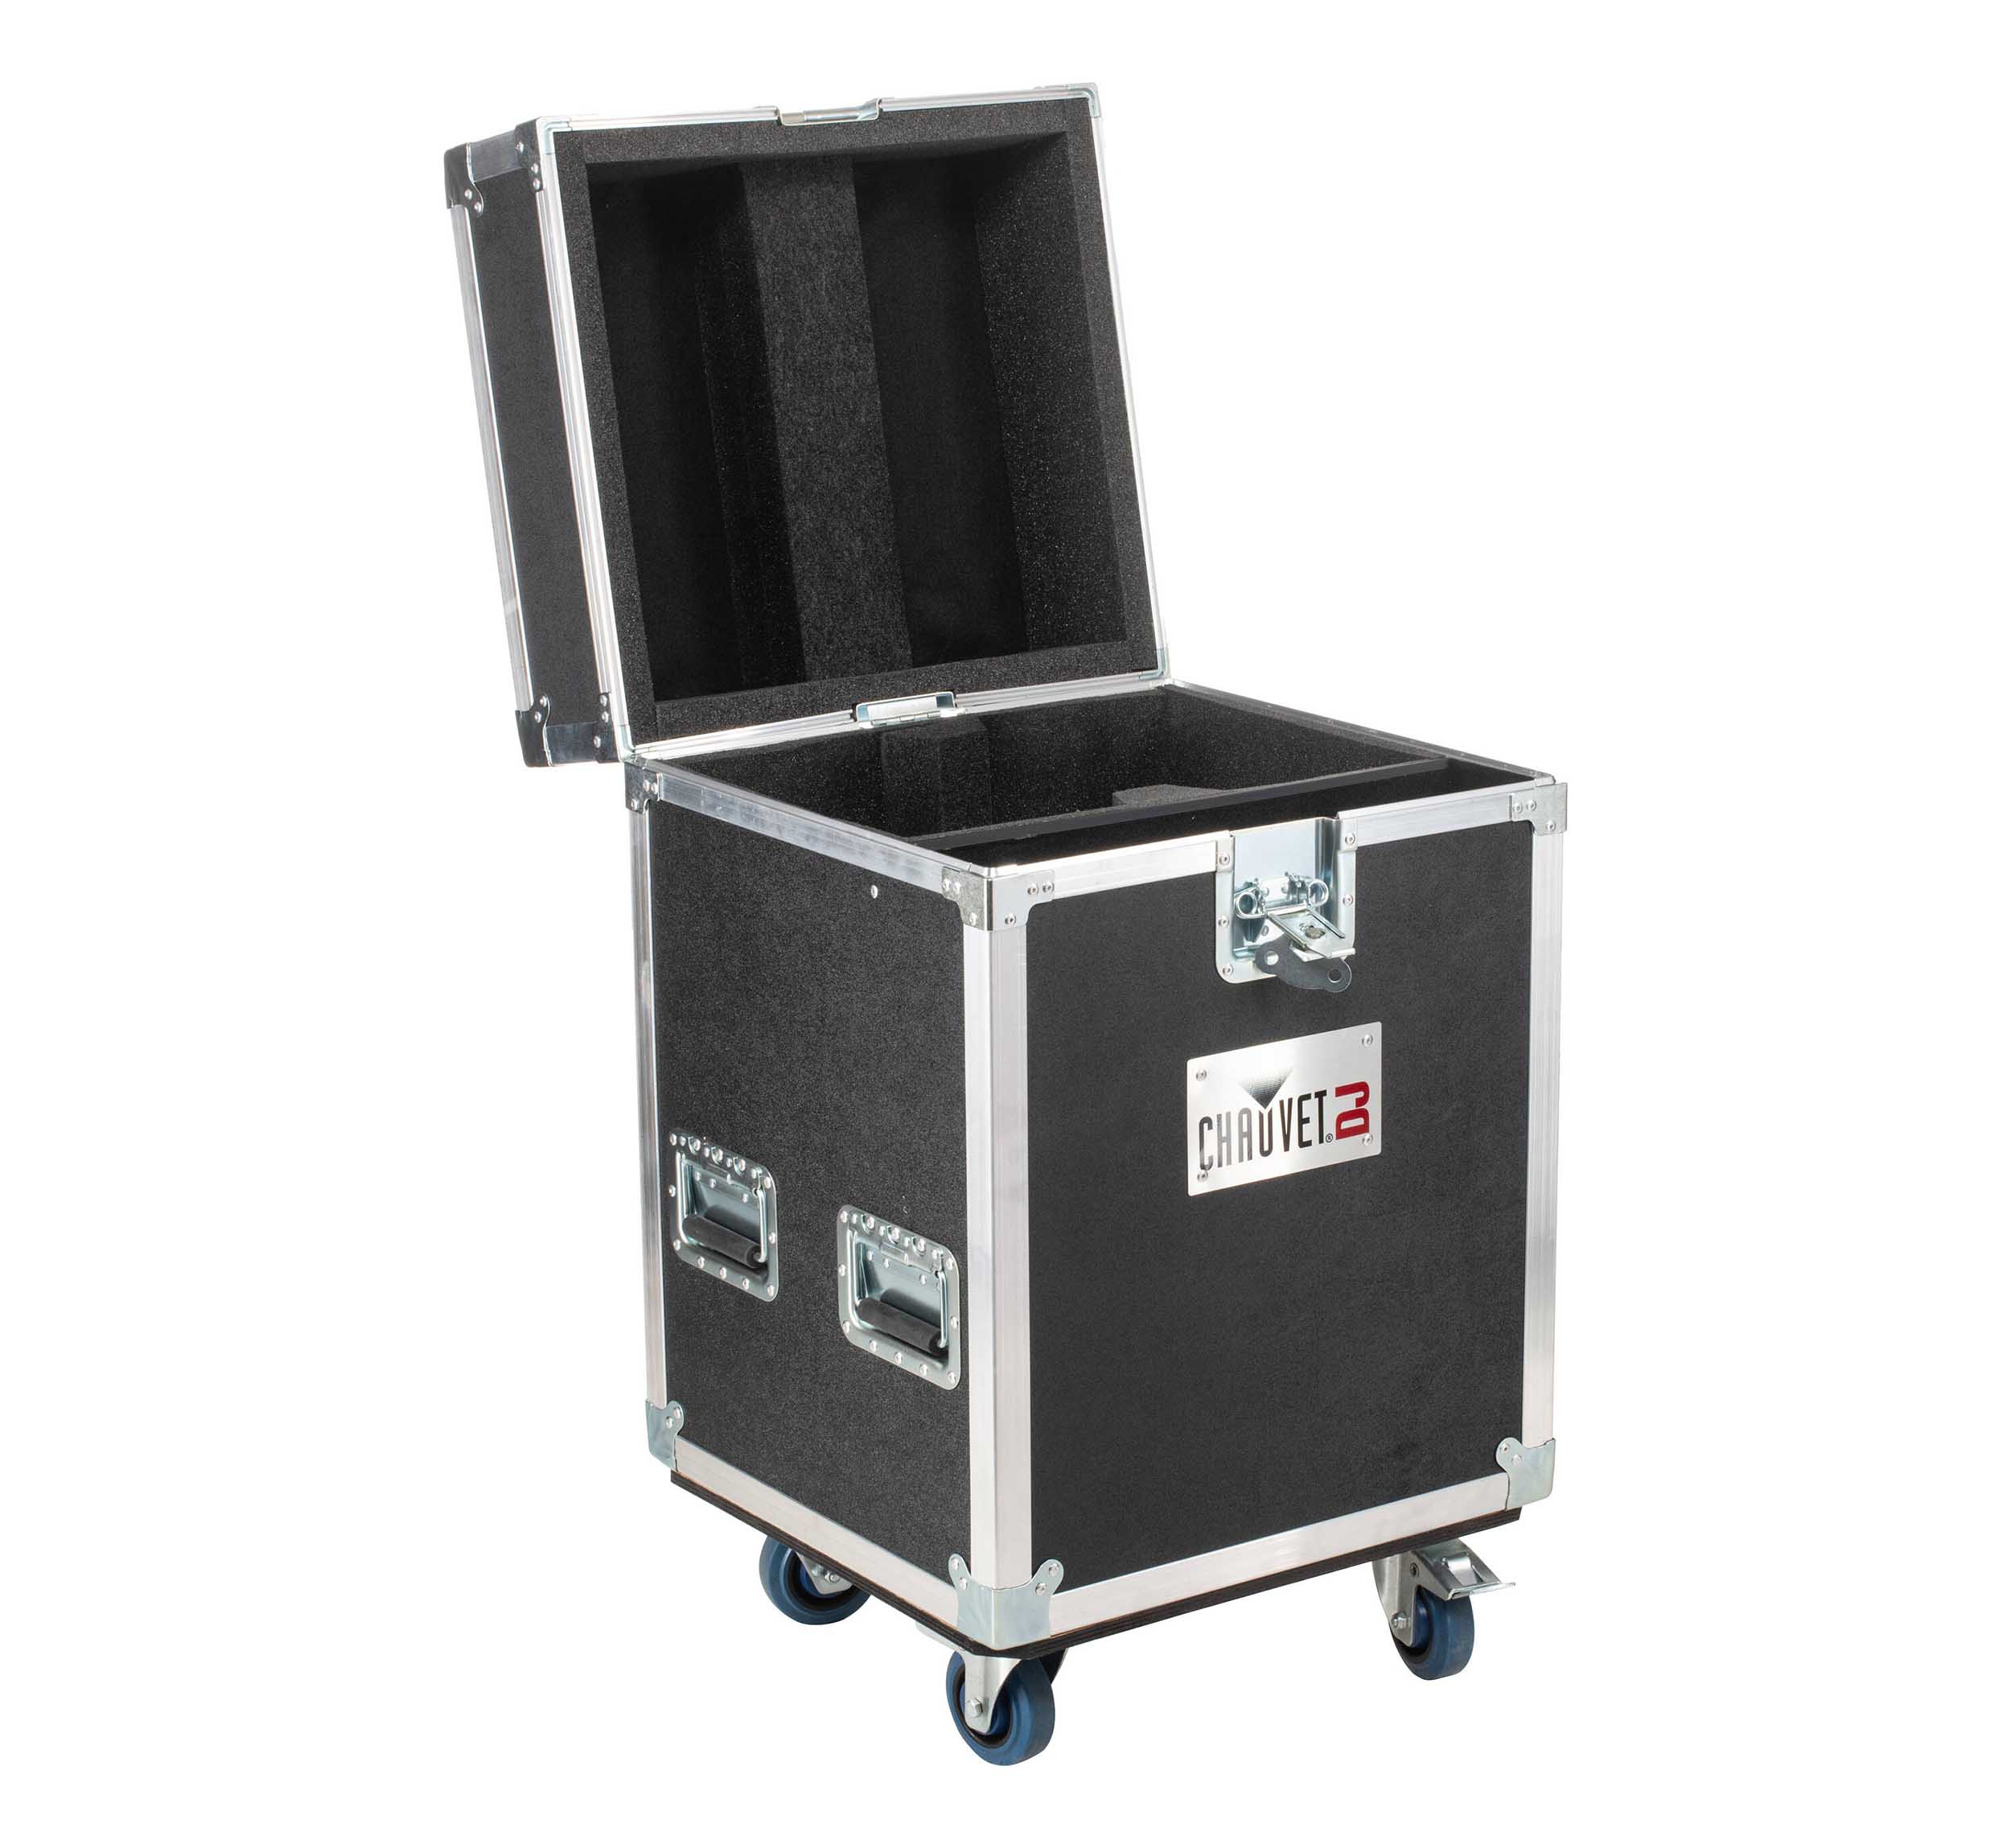 Chauvet DJ Intimidator Road Case for 2 Moving Head Fixtures by Chauvet DJ